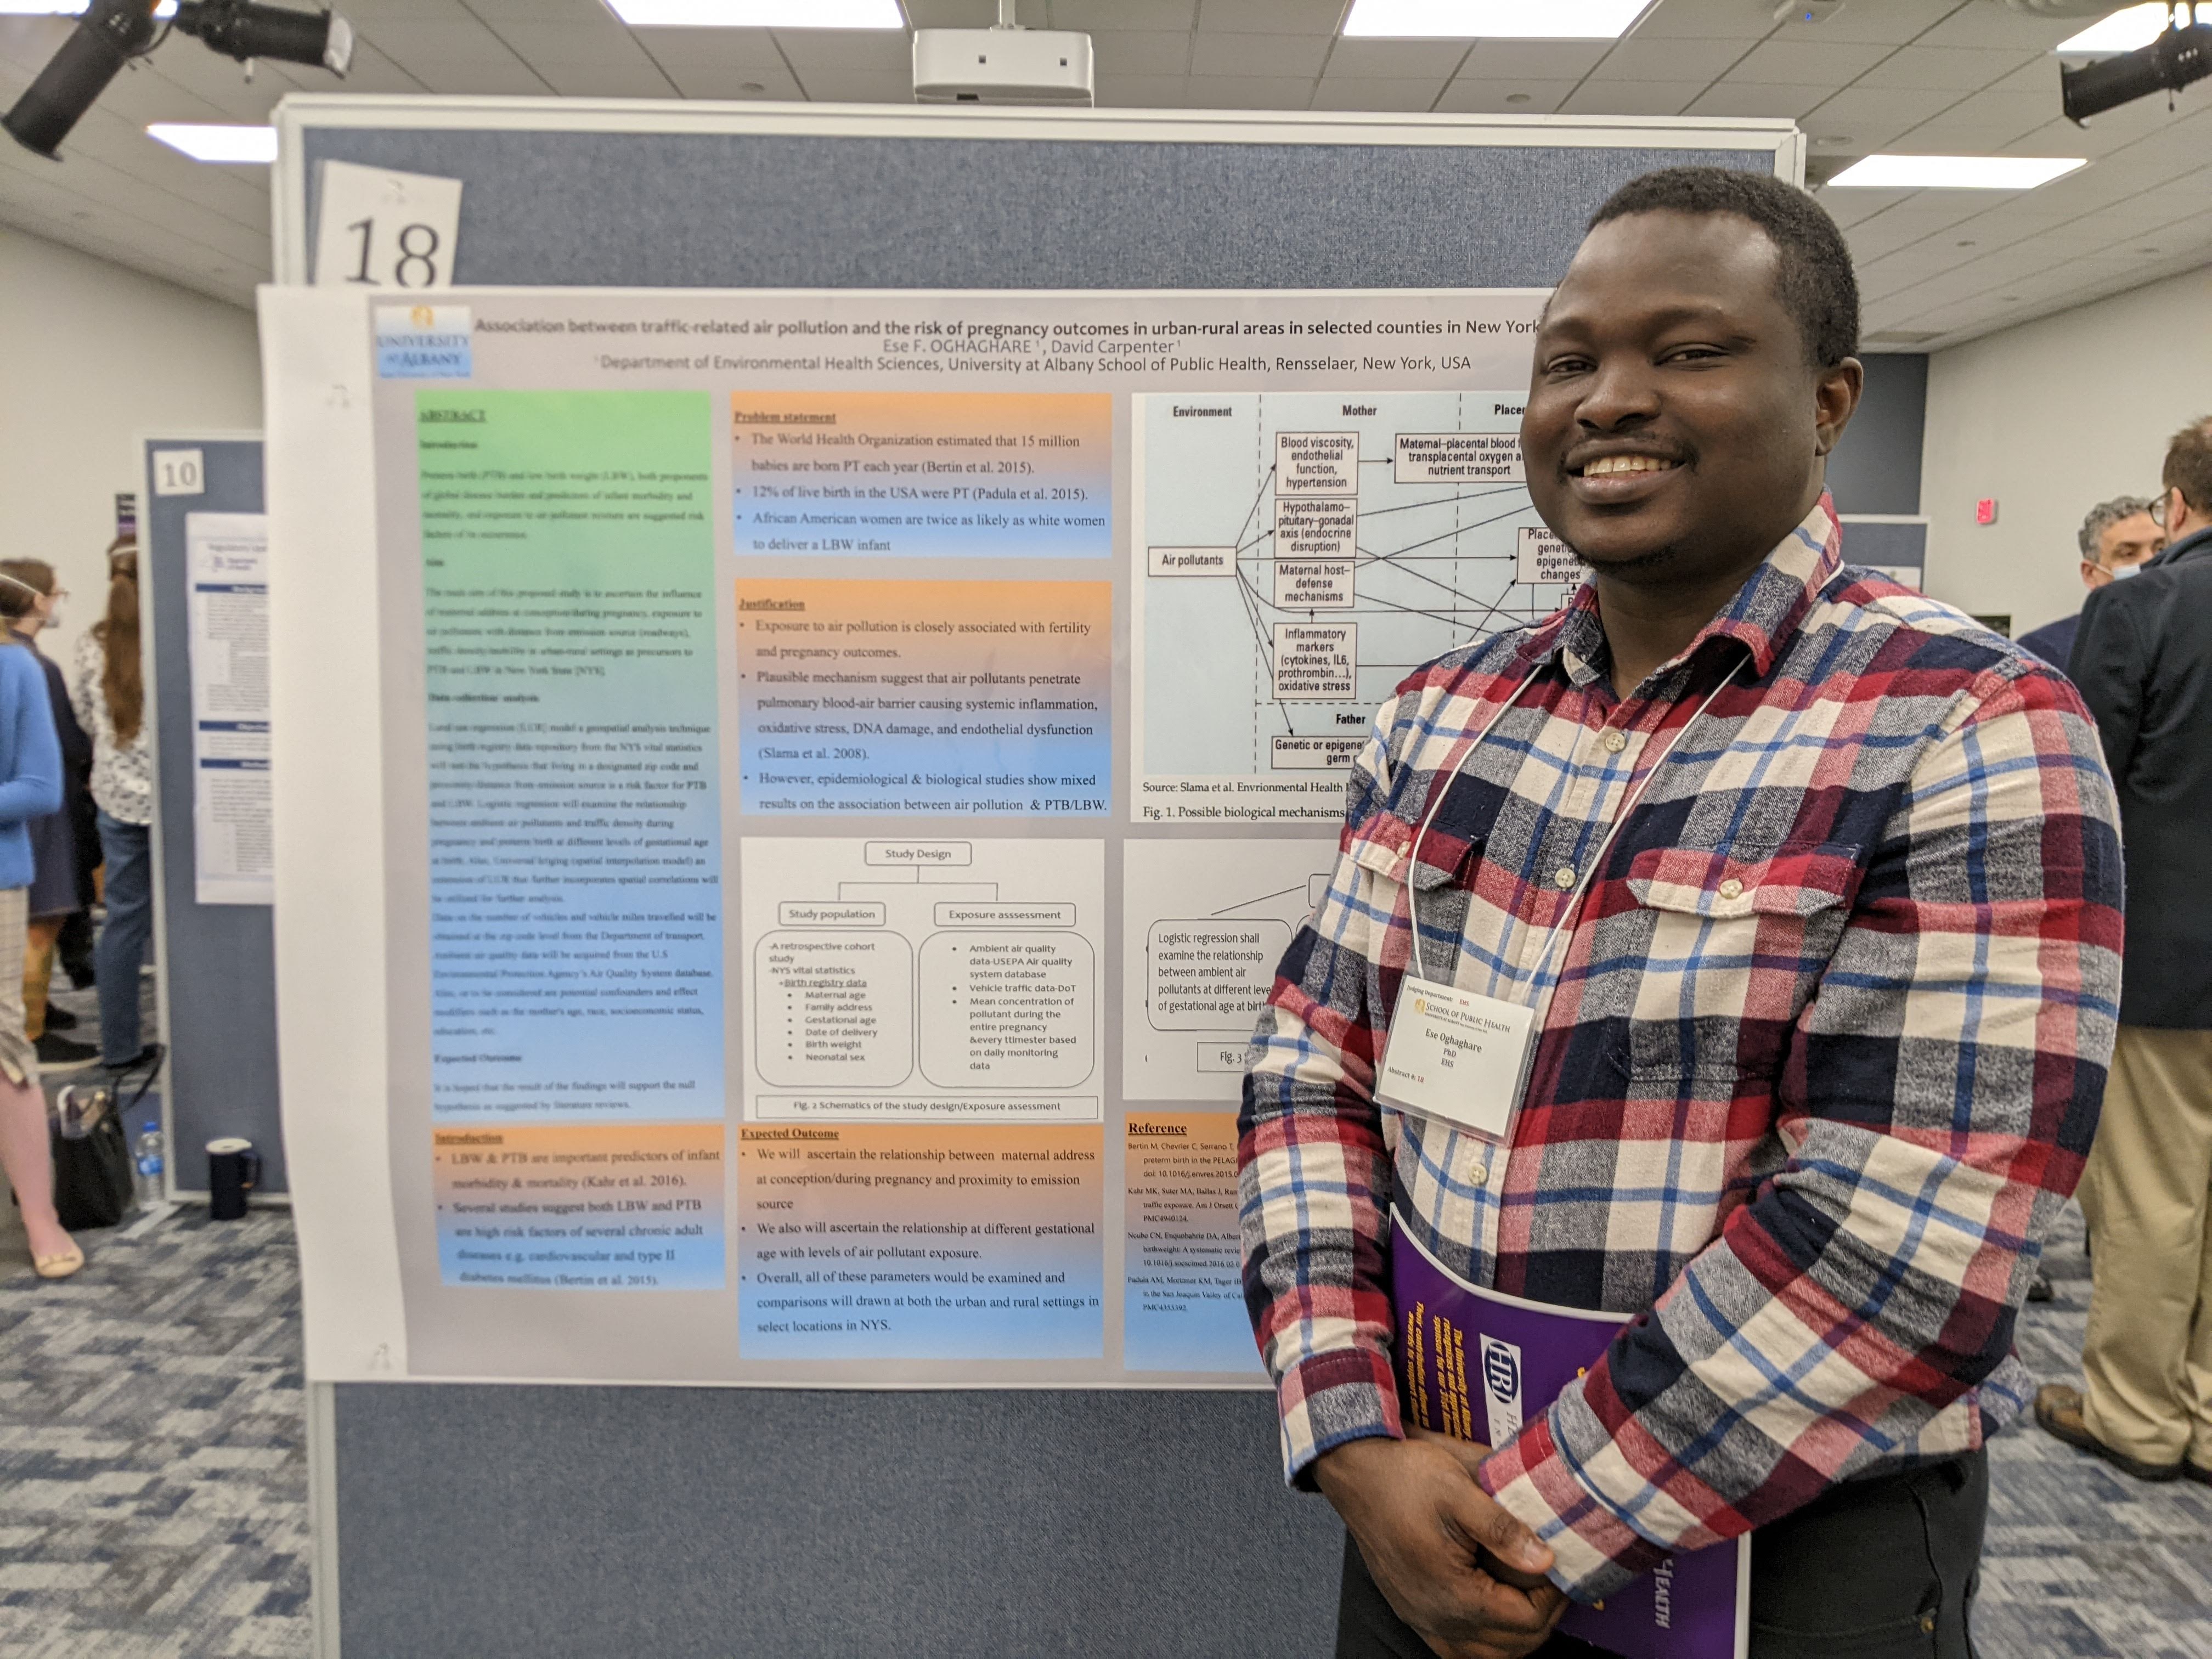 A portrait of Ese next to his poster on Poster Day